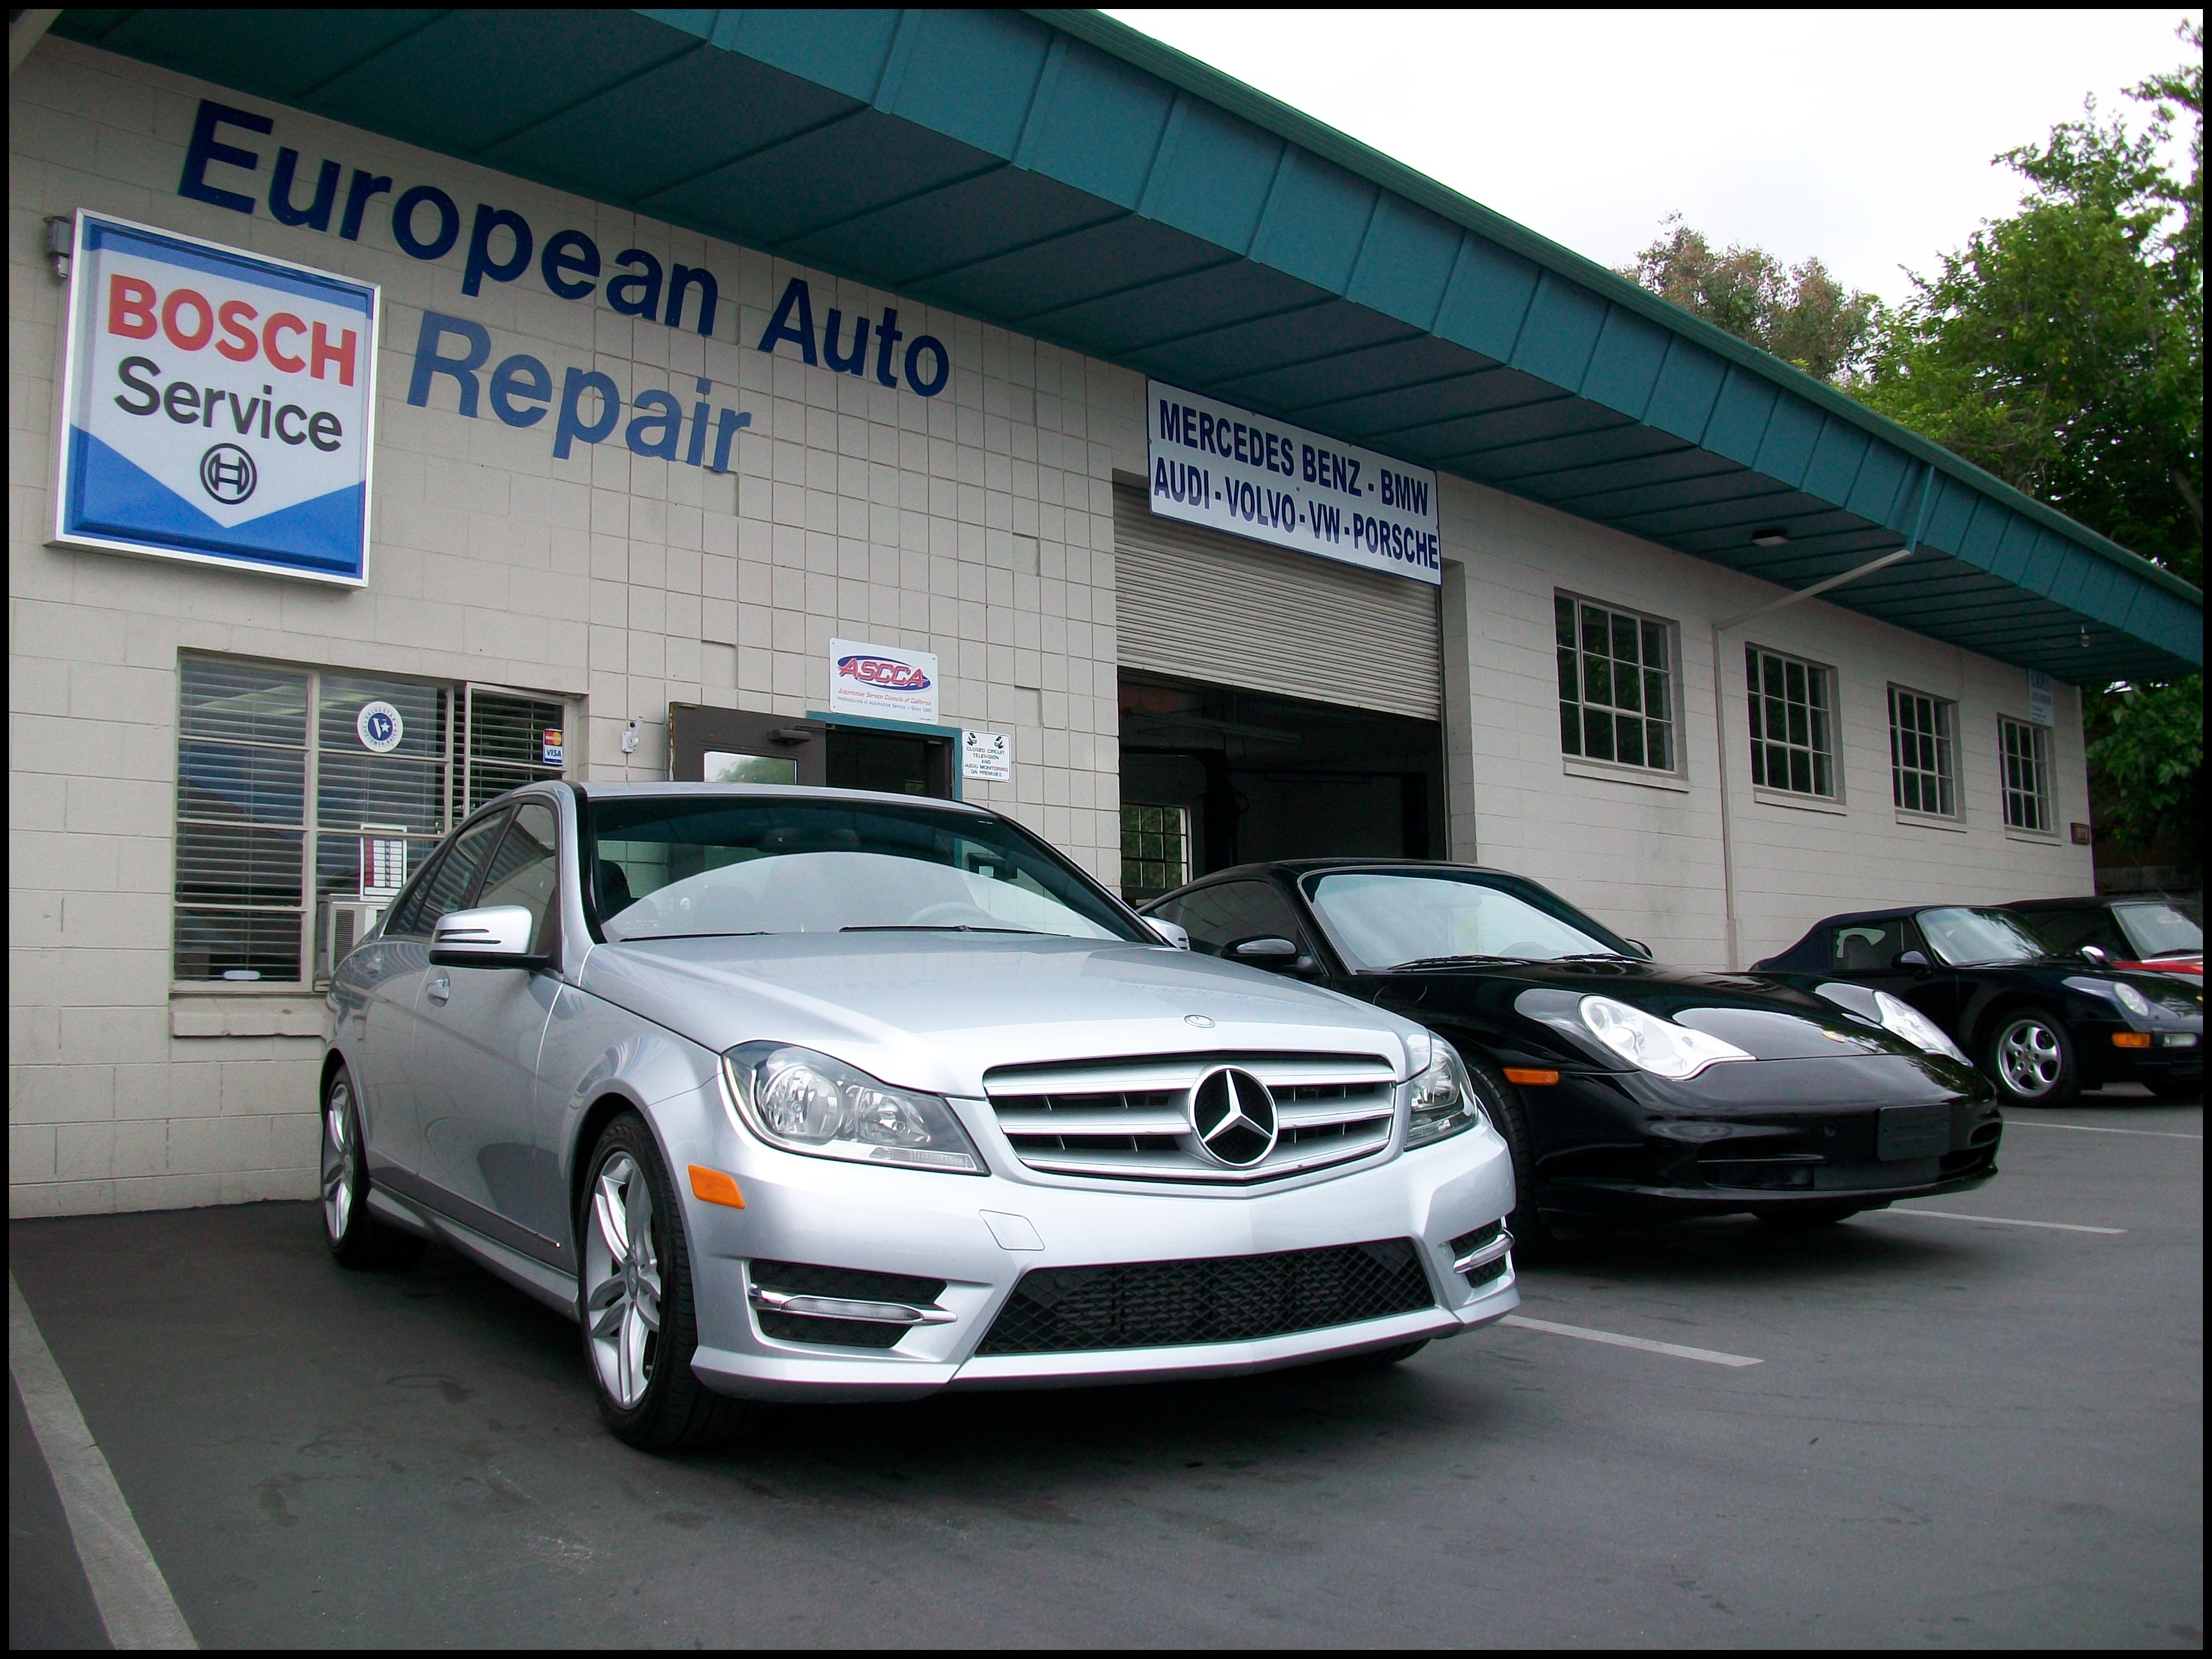 most owners will naturally gravitate to a dealer s huge service center After all the warranty covered service and repairs are free